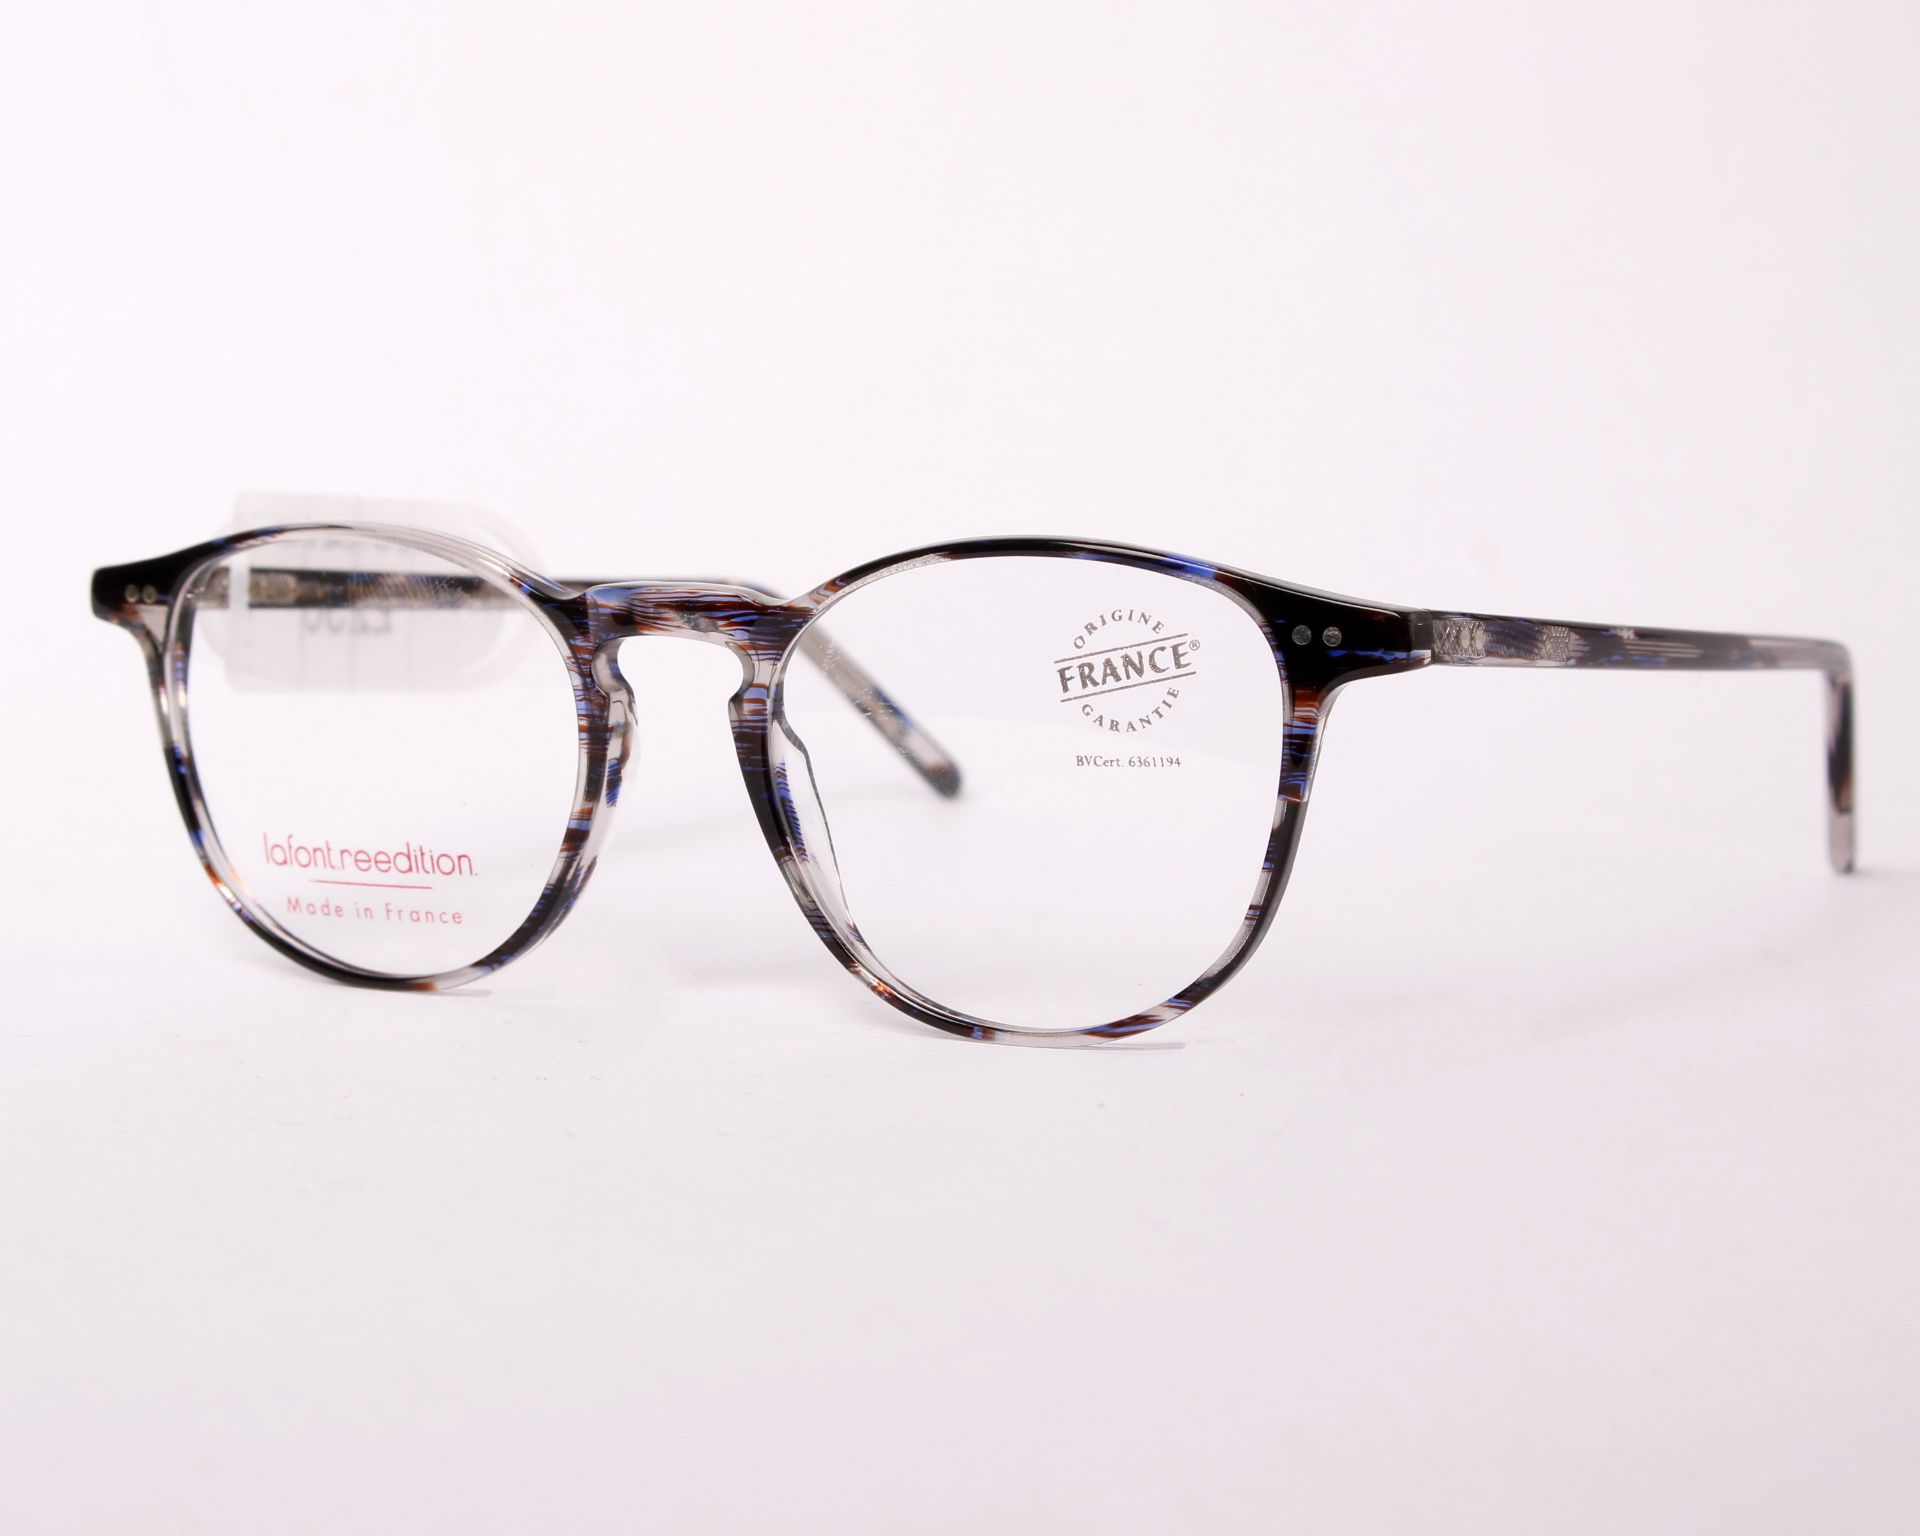 A pair of as new Lafont Reedition glasses frames with clear glass (RRP £230).